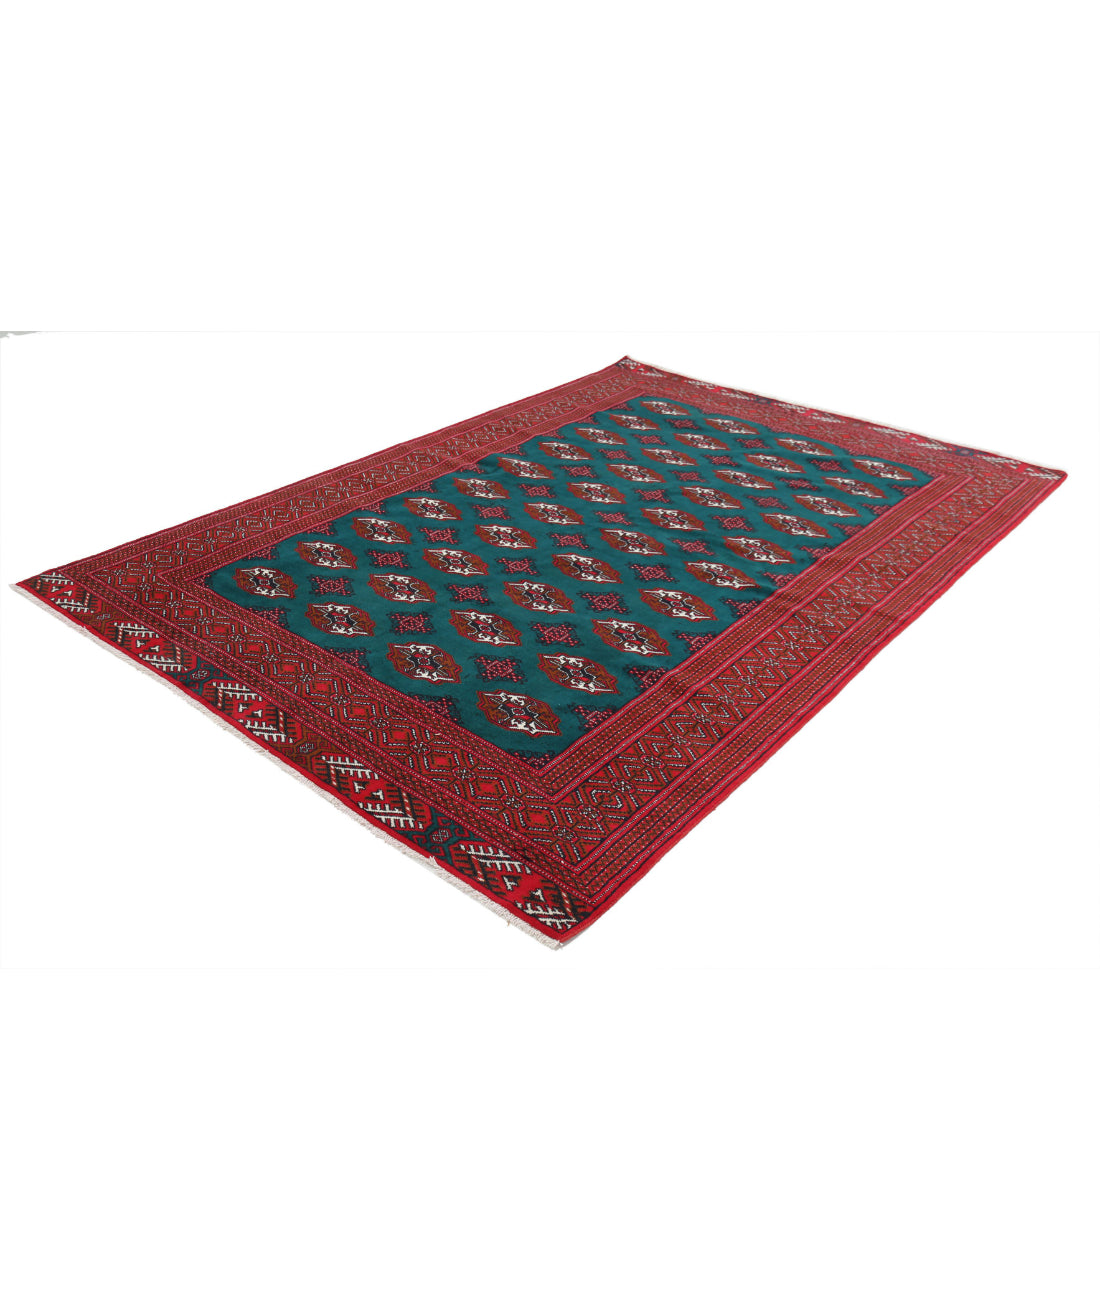 Hand Knotted Tribal Bokhara Wool Rug - 6'2'' x 9'7'' 6'2'' x 9'7'' (185 X 288) / Green / Red